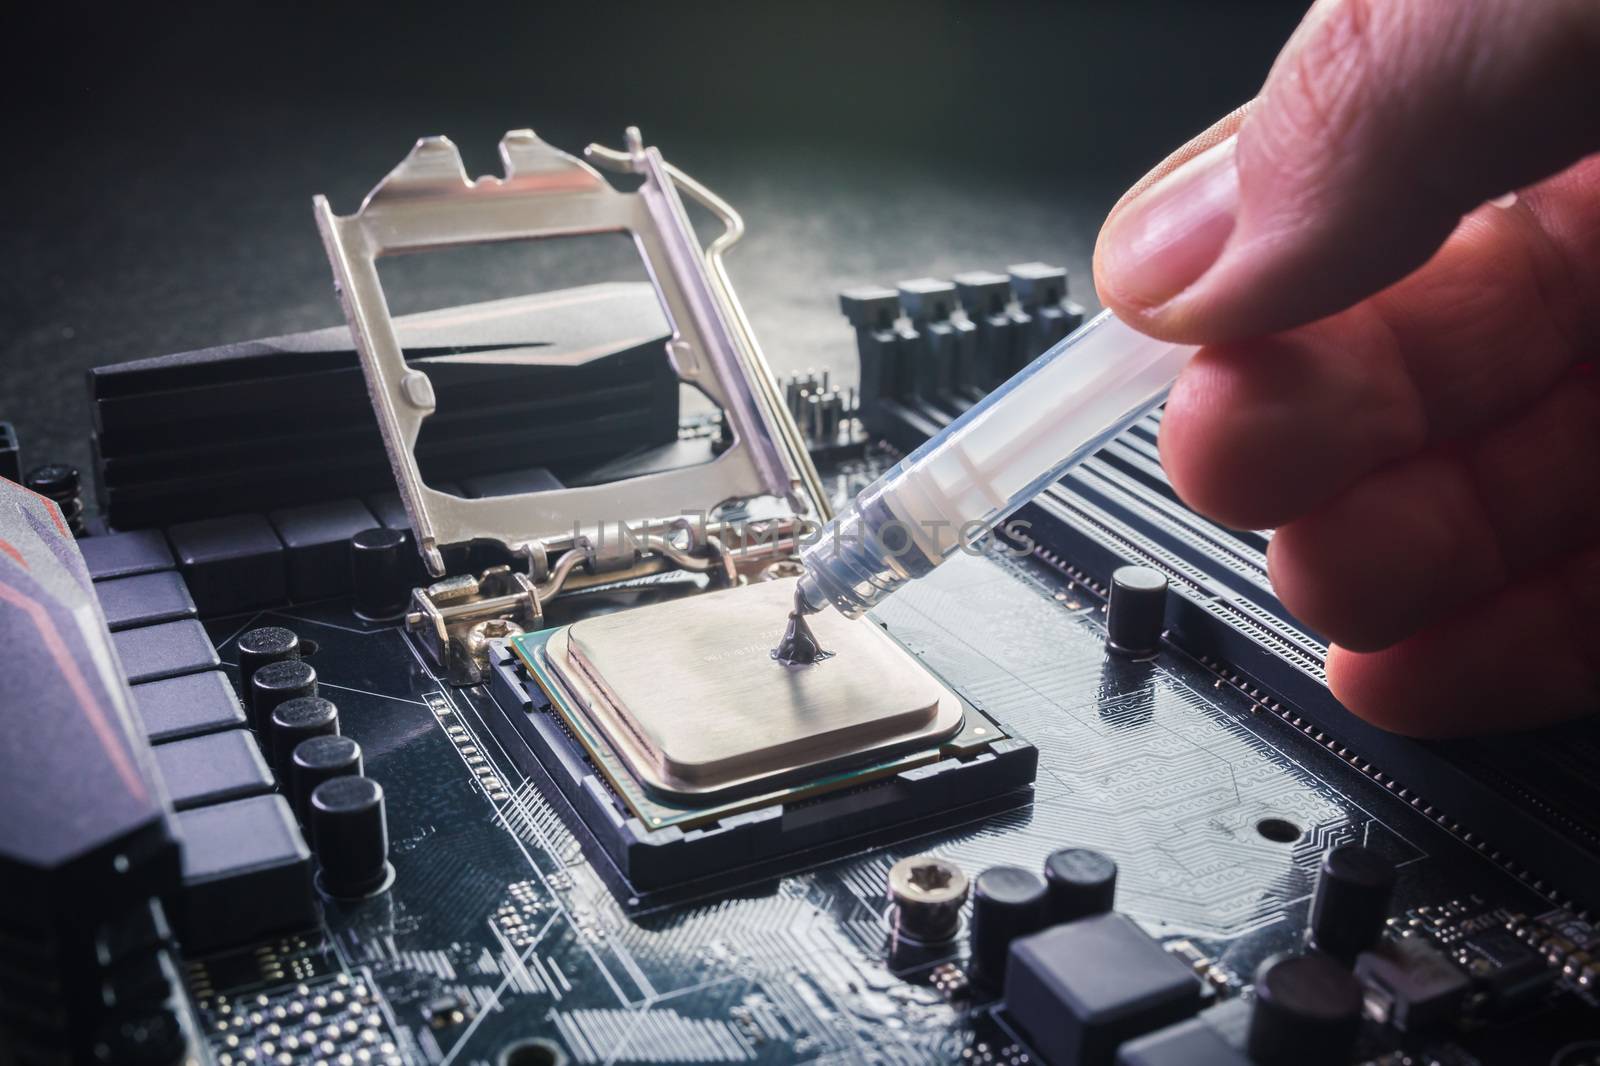 Close up to technician squeezing or application the thermal paste compound on the top of main cpu in the socket. Concept of repairing or upgrading computer hardware. by petrsvoboda91